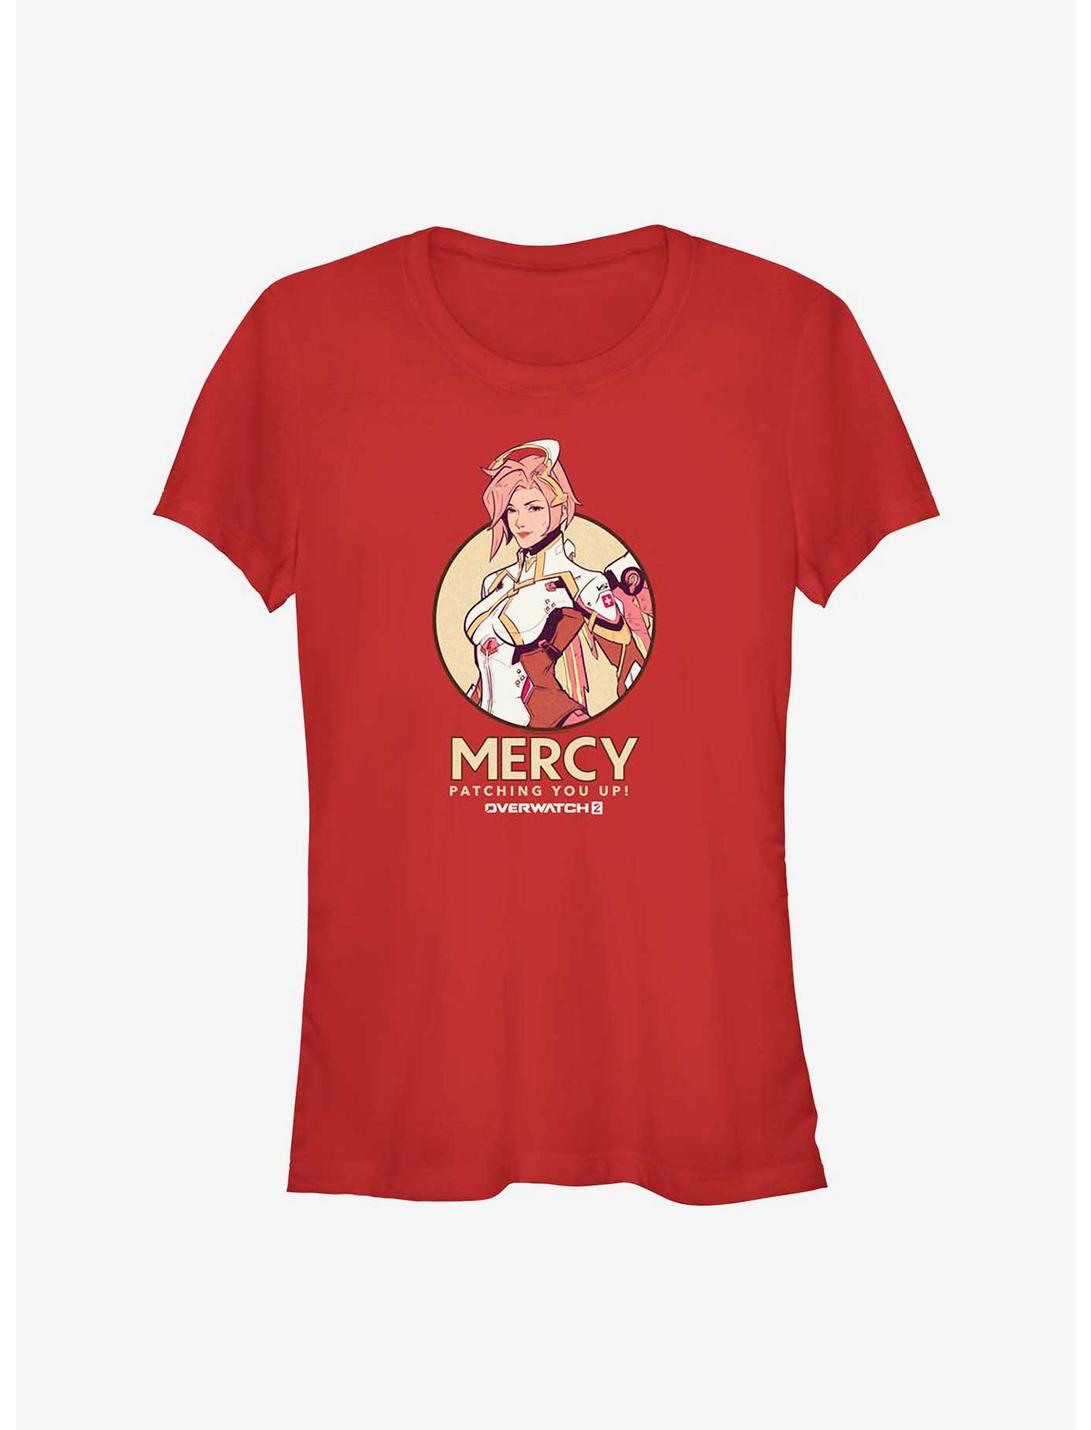 Overwatch 2 Mercy Patching You Up Girls T-Shirt, RED, hi-res